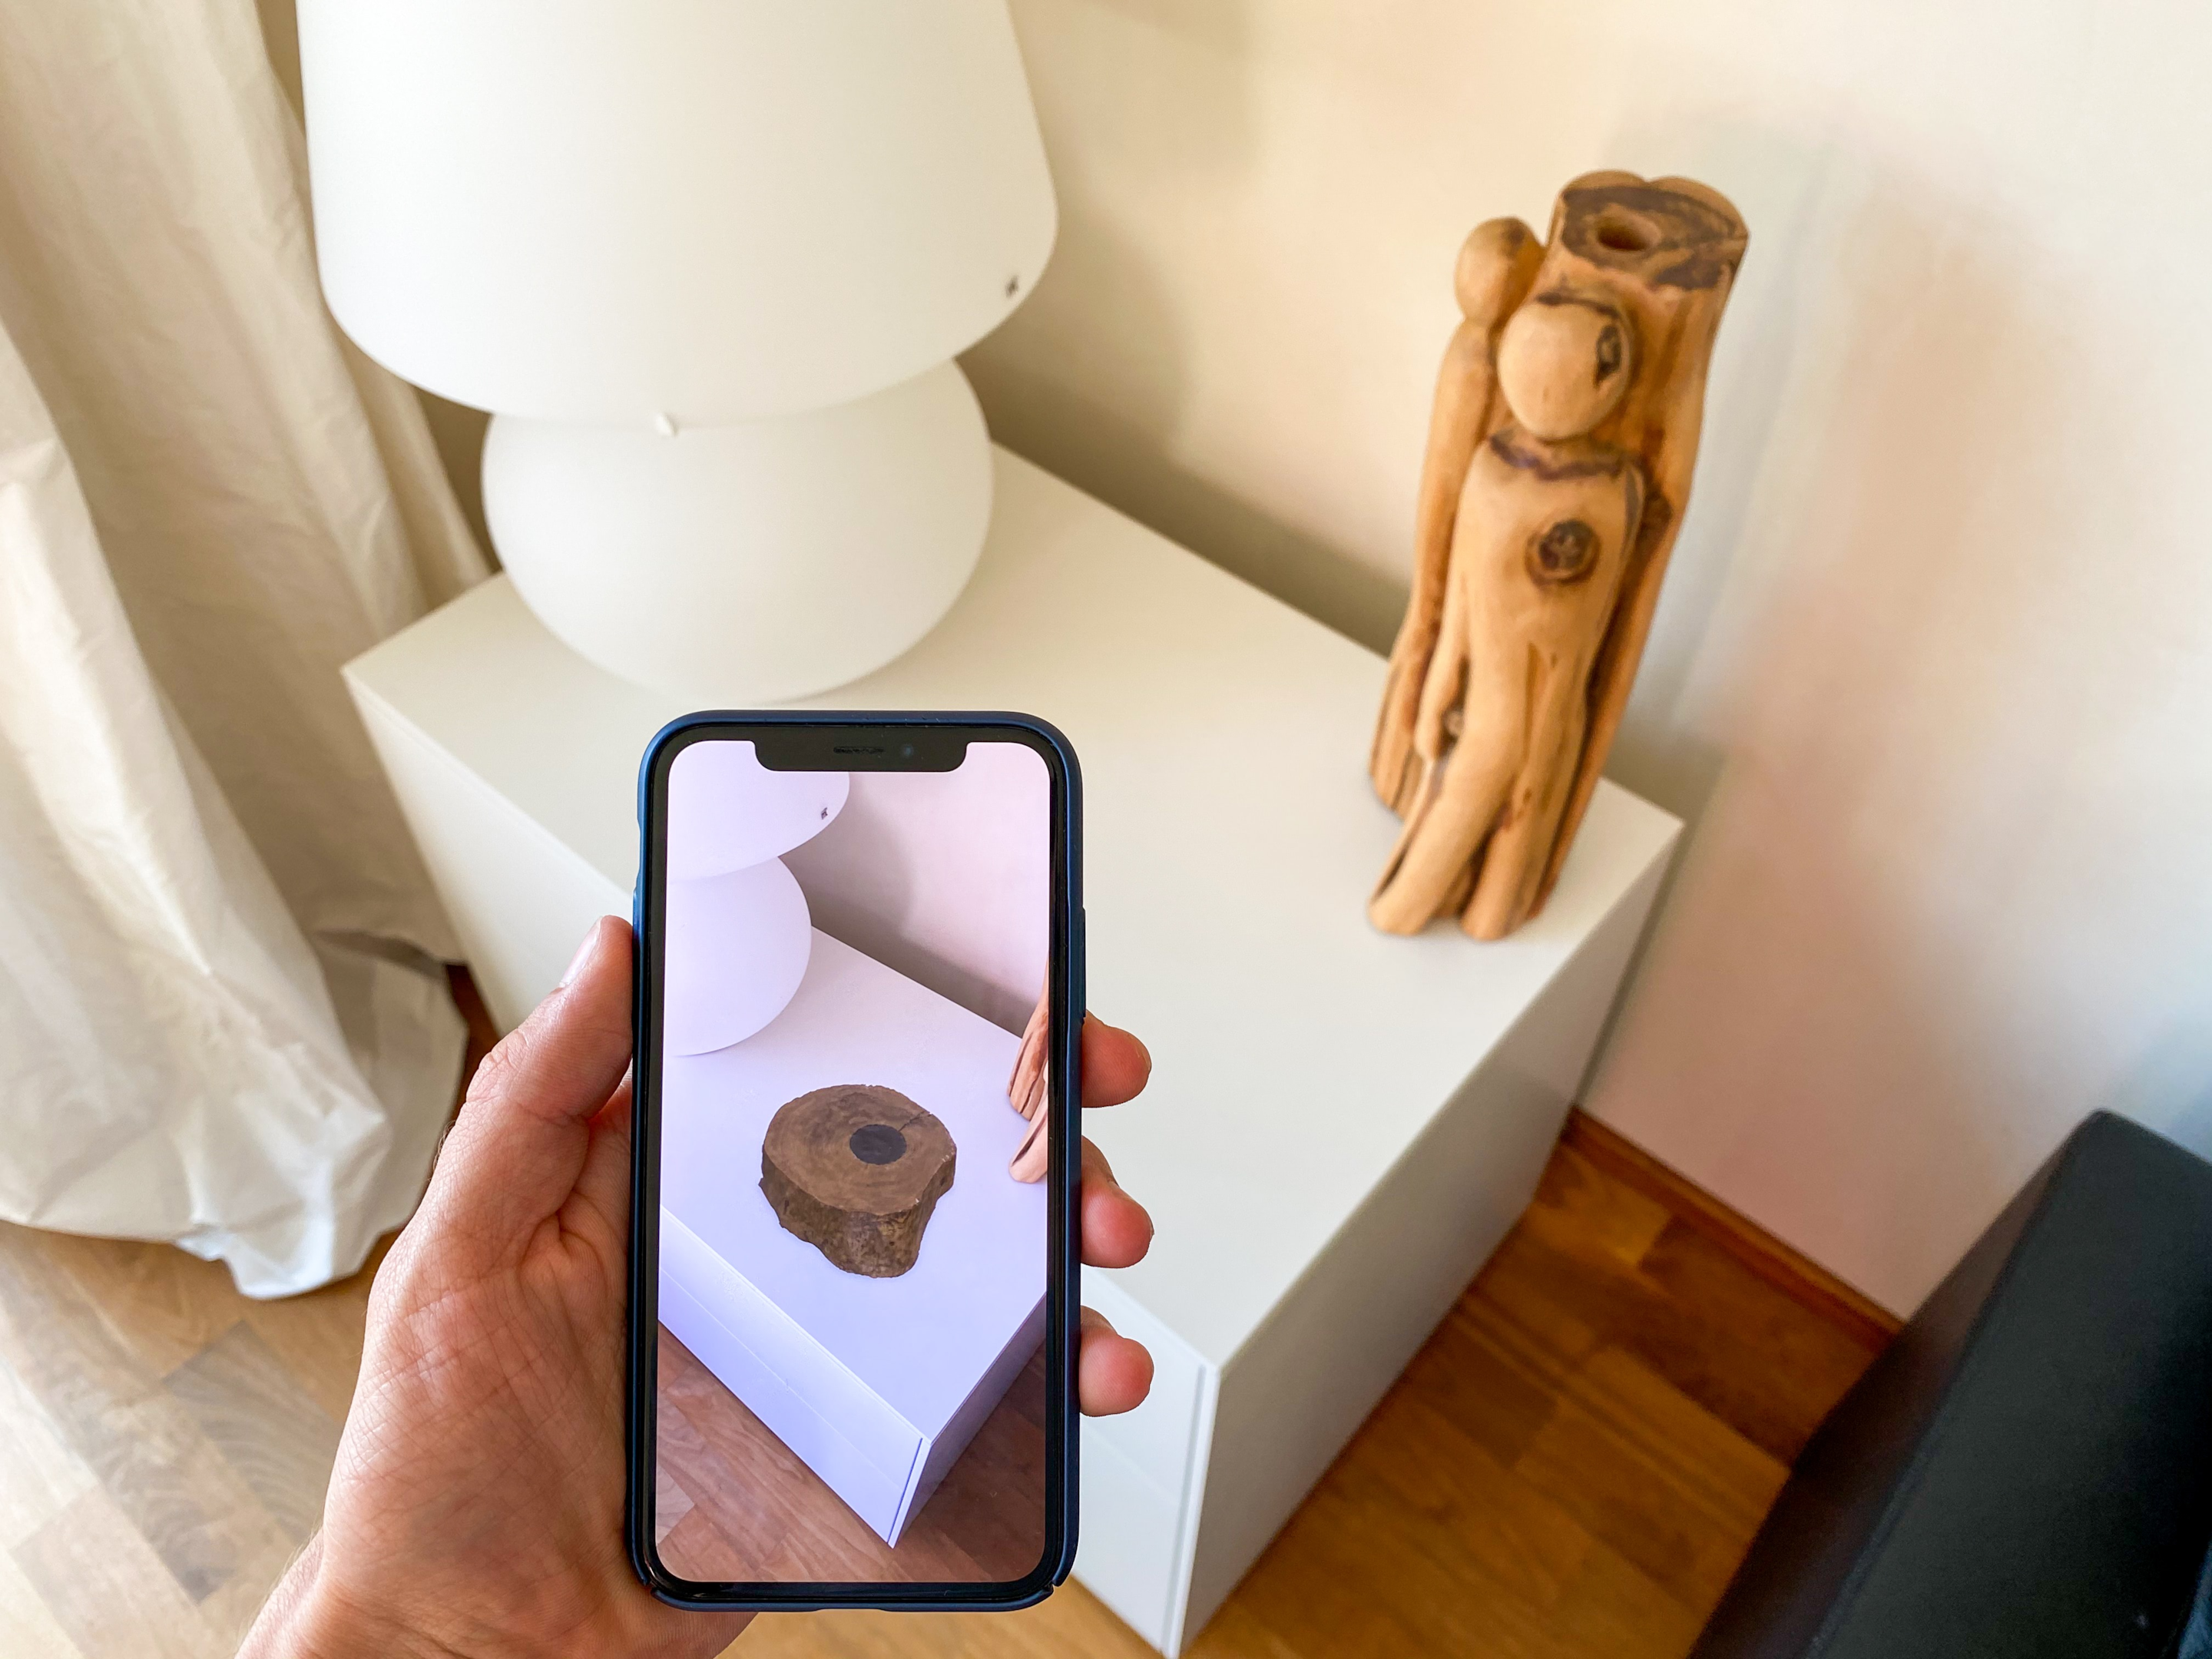 Augmented reality (AR) has become one of the leading marketing tools for brands by bringing the items into your world before purchase.